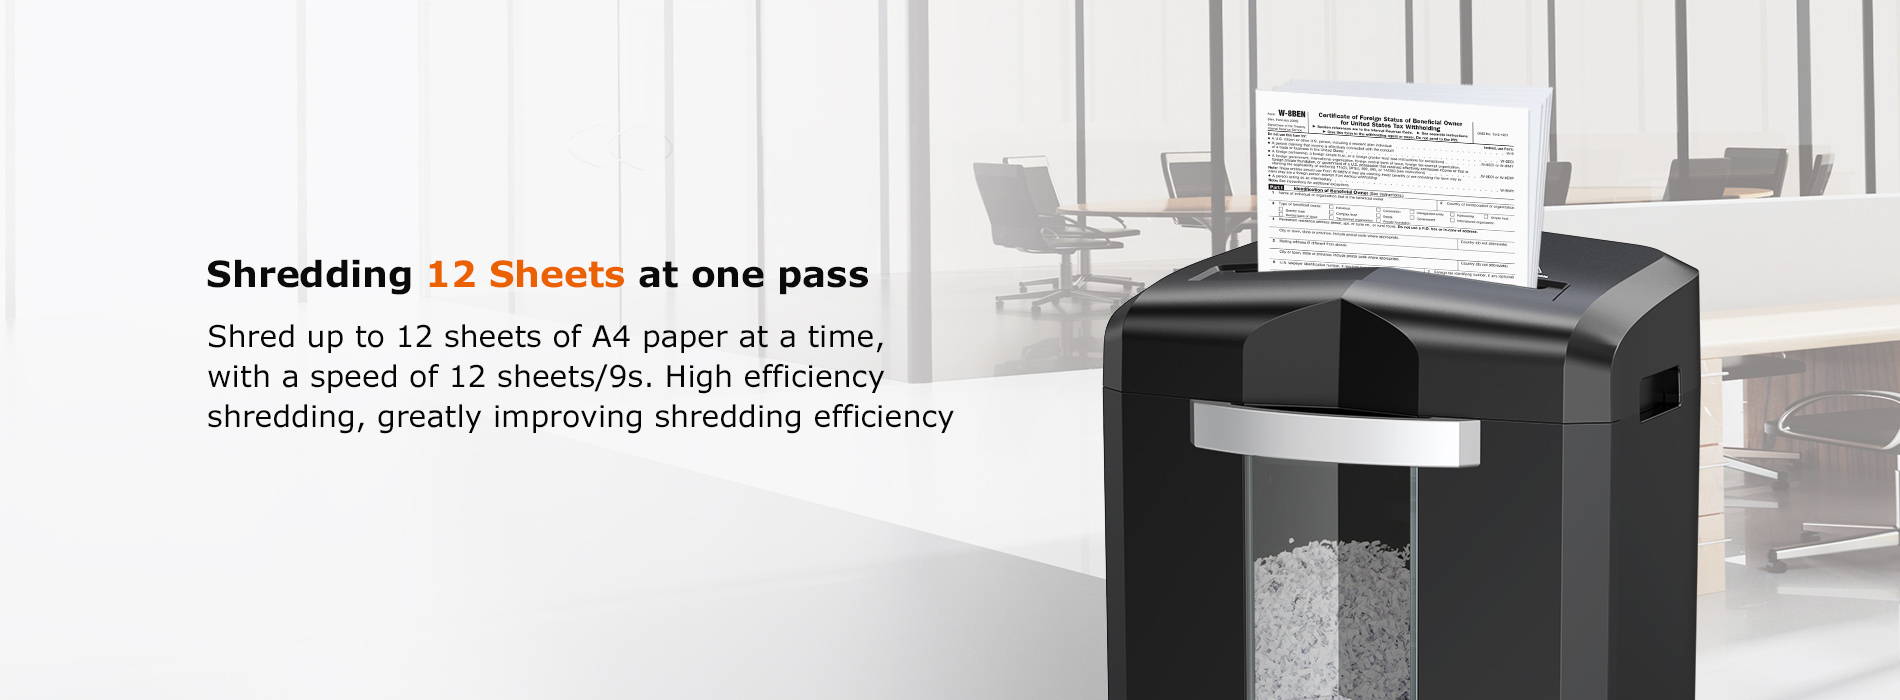 Shredding 12 Sheets at one pass  Shred up to 12 sheets of A4 paper at a time, with a speed of 12 sheets/9s. High efficiency shredding, greatly improving shredding efficiency